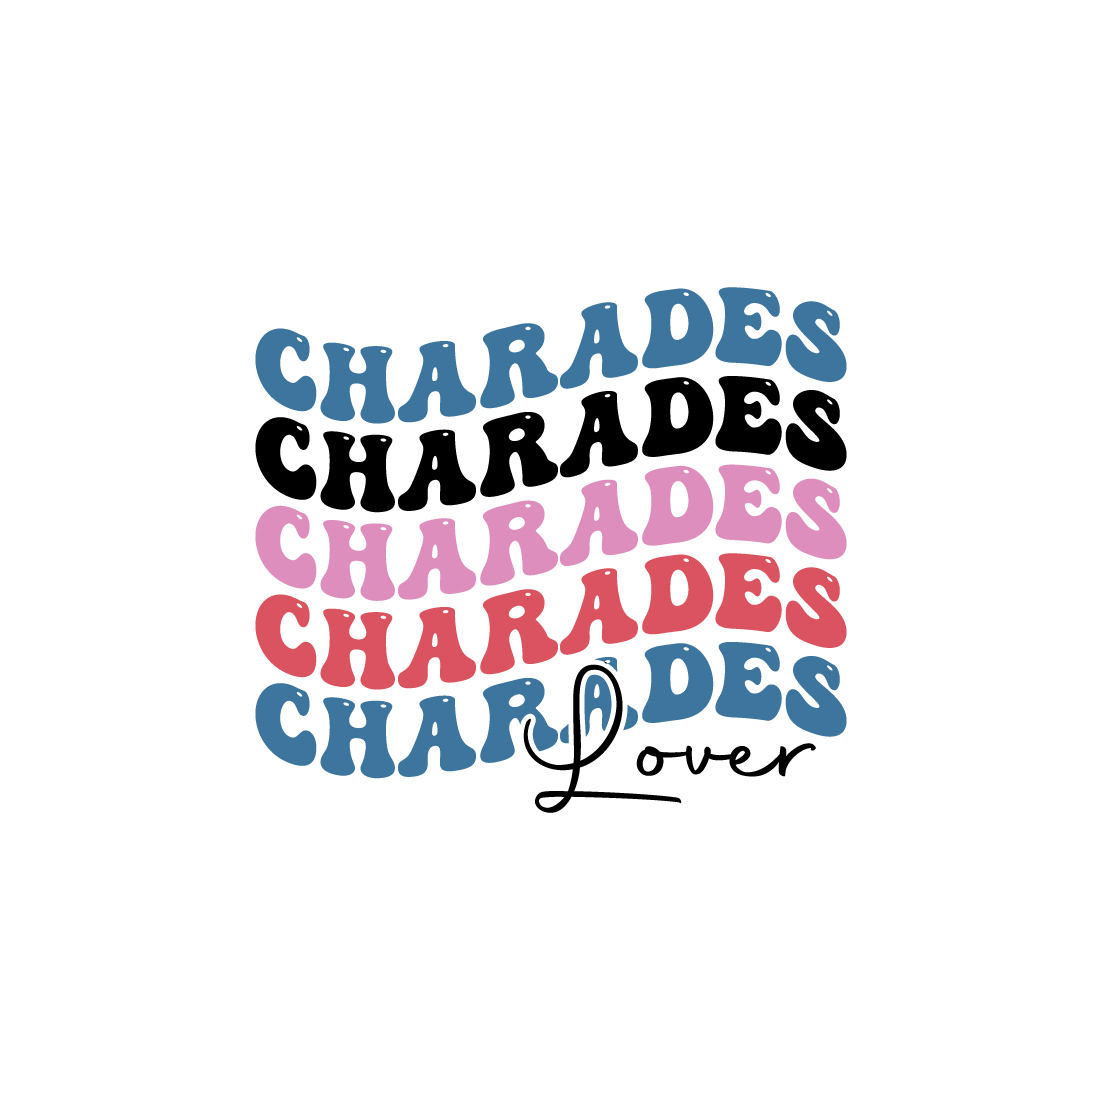 Charades lover indoor game retro typography design for t-shirts, cards, frame artwork, phone cases, bags, mugs, stickers, tumblers, print, etc cover image.